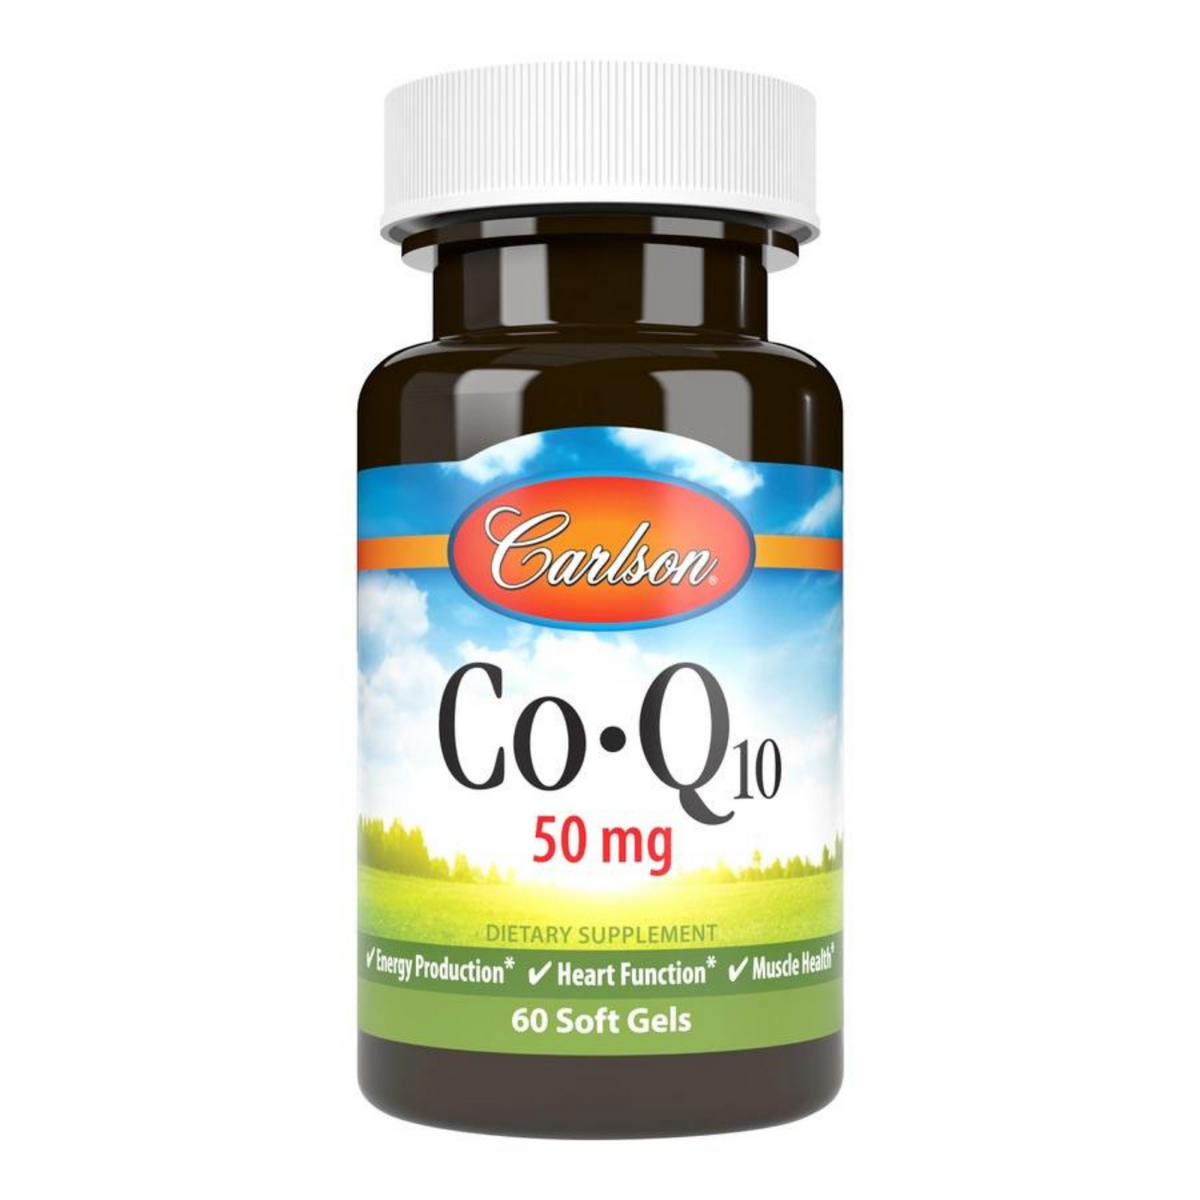 Primary image of Coenzyme Q-10 50mg